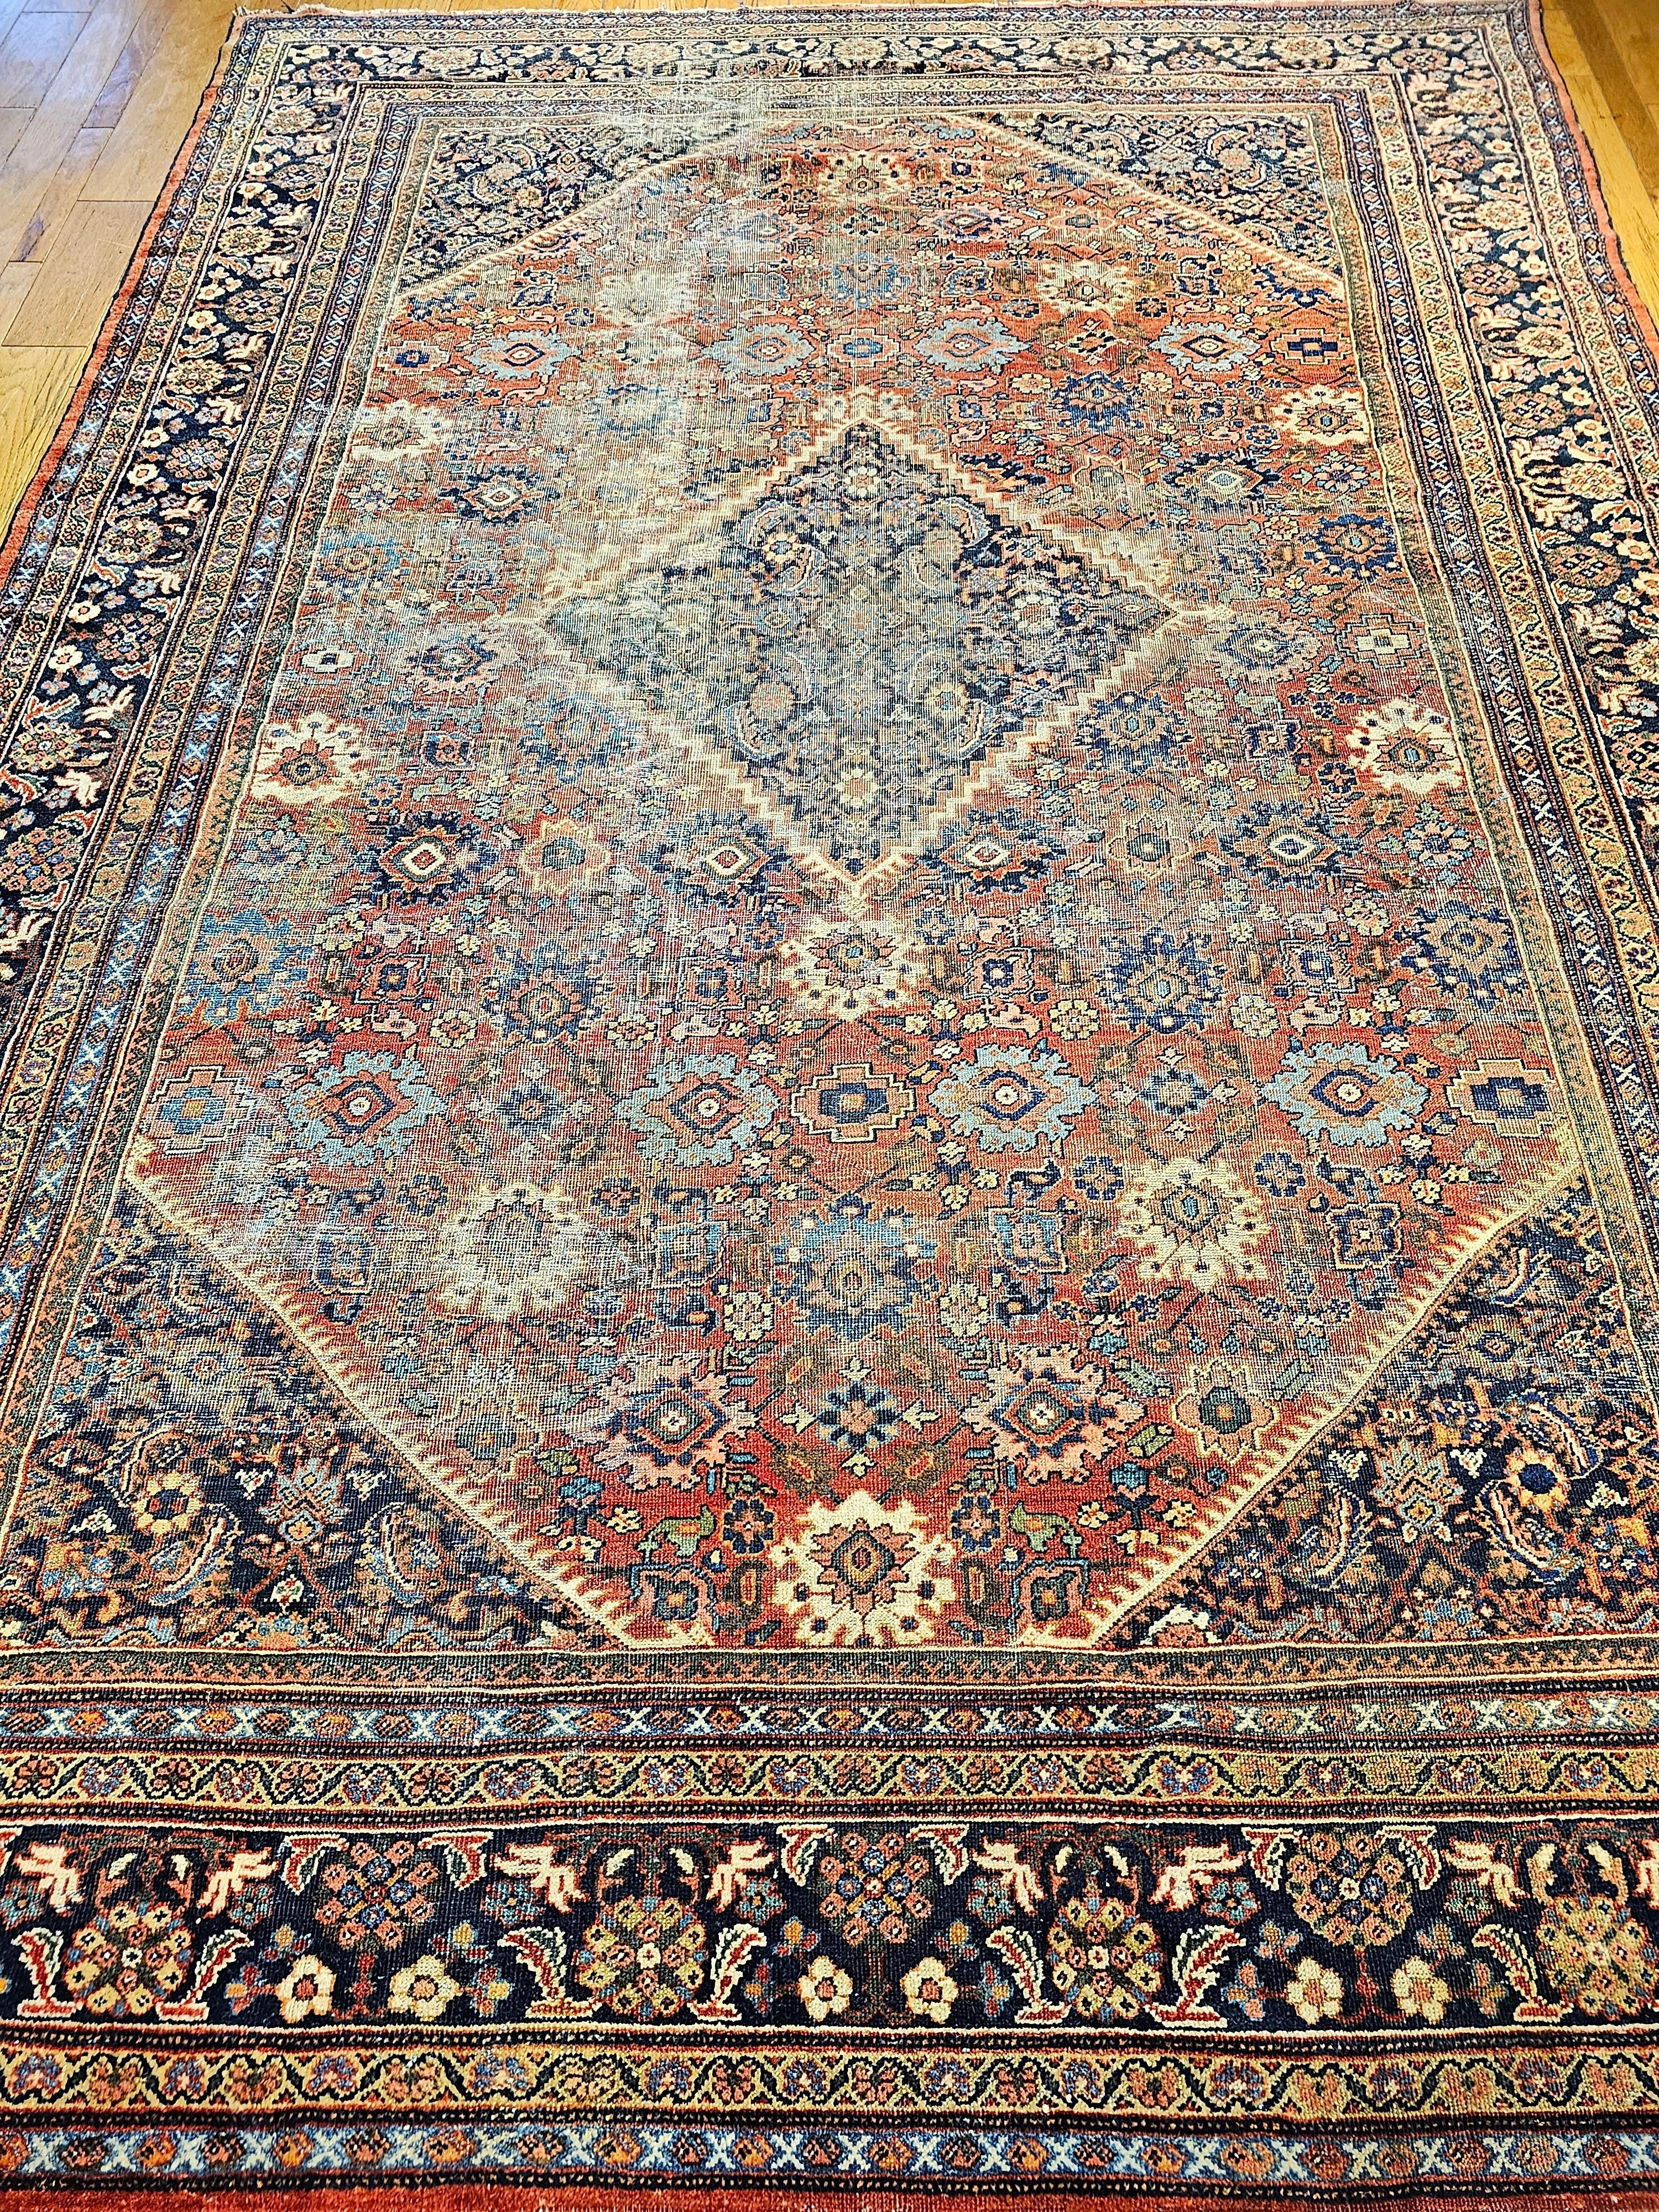 A beautiful Mahal Sultanabad rug from the late 1800s.   A fine artisan workshop Persian rug from the late 19th century.   The field is in a brick red color with large geometric forms throughout the field in colors of red, pink, green, blue, and